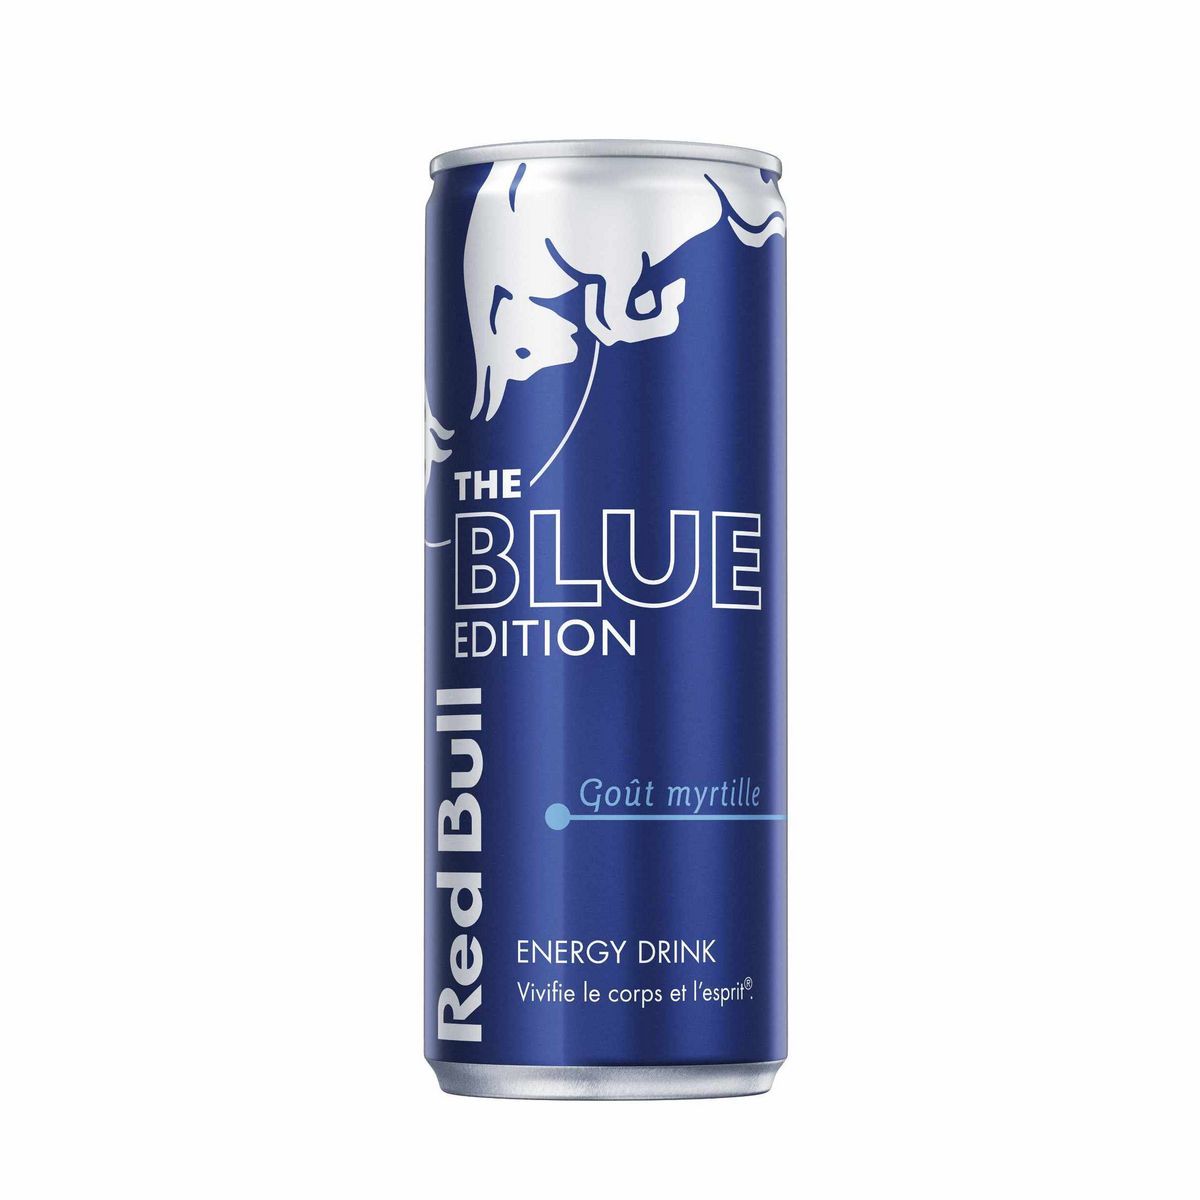 RED BULL ENERGY DRINK BLUE EDITION